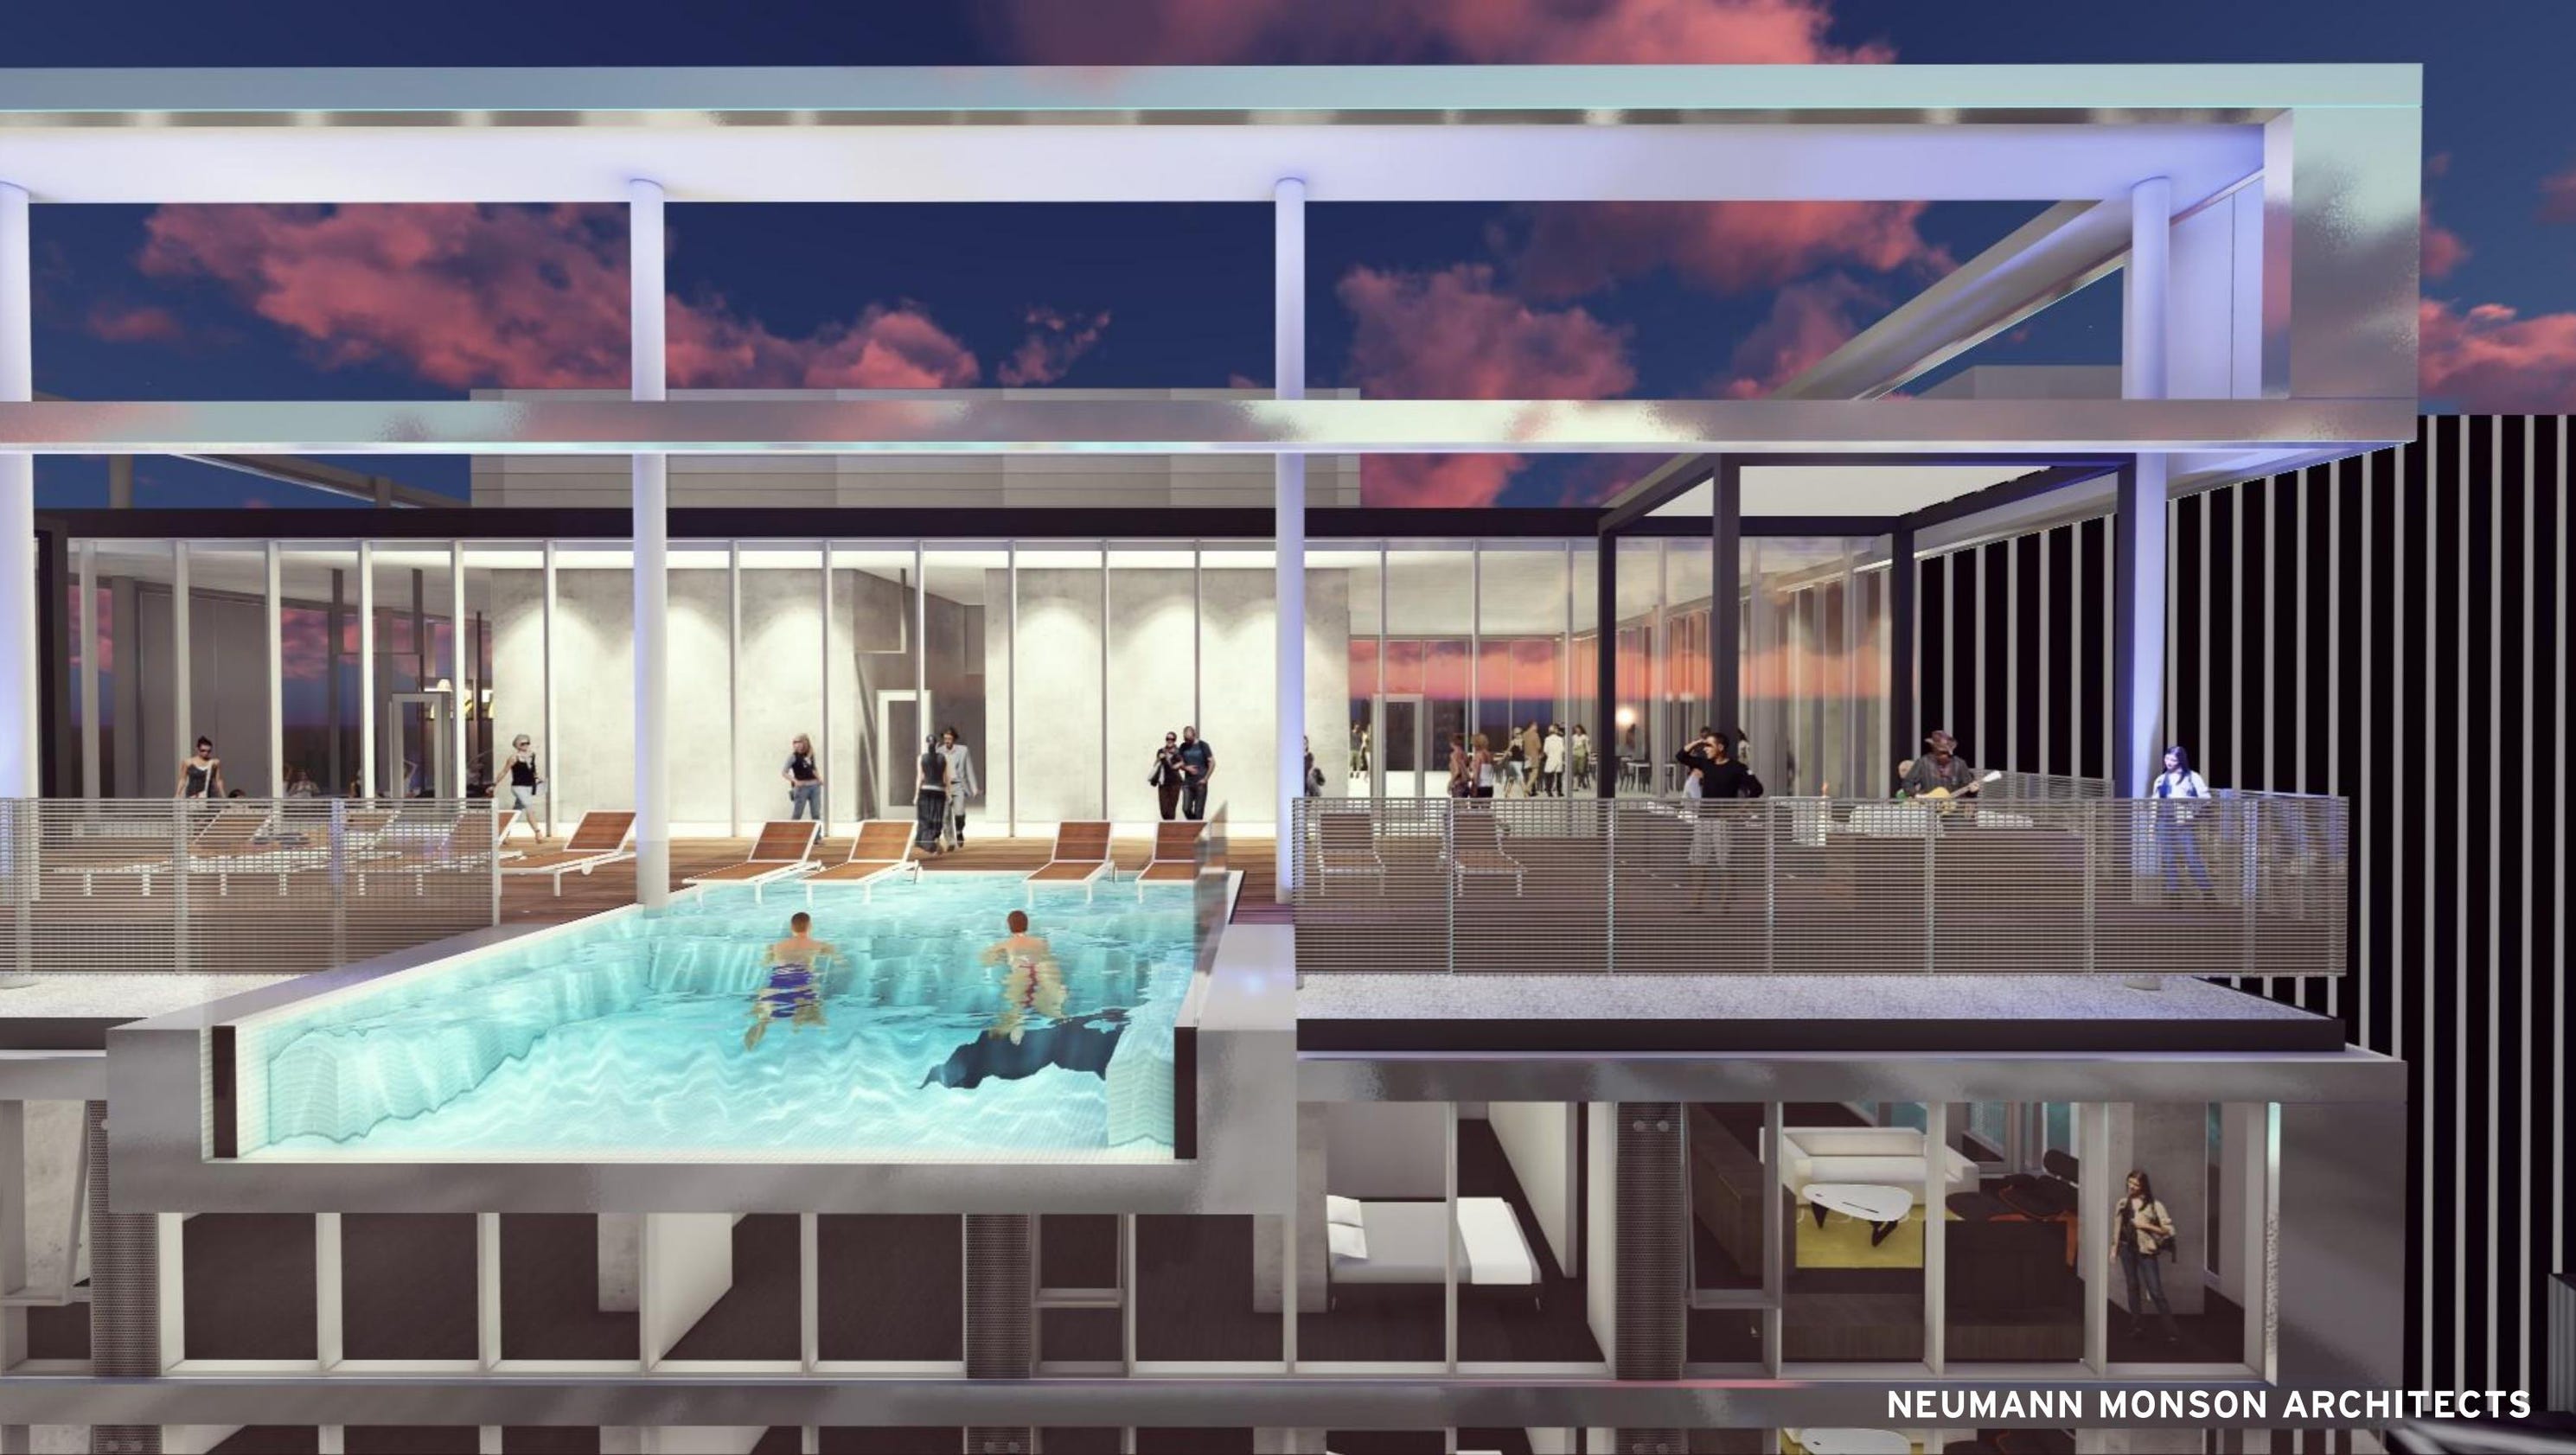 Hanging rooftop pool will let swimmers see 26 stories down3200 x 1680